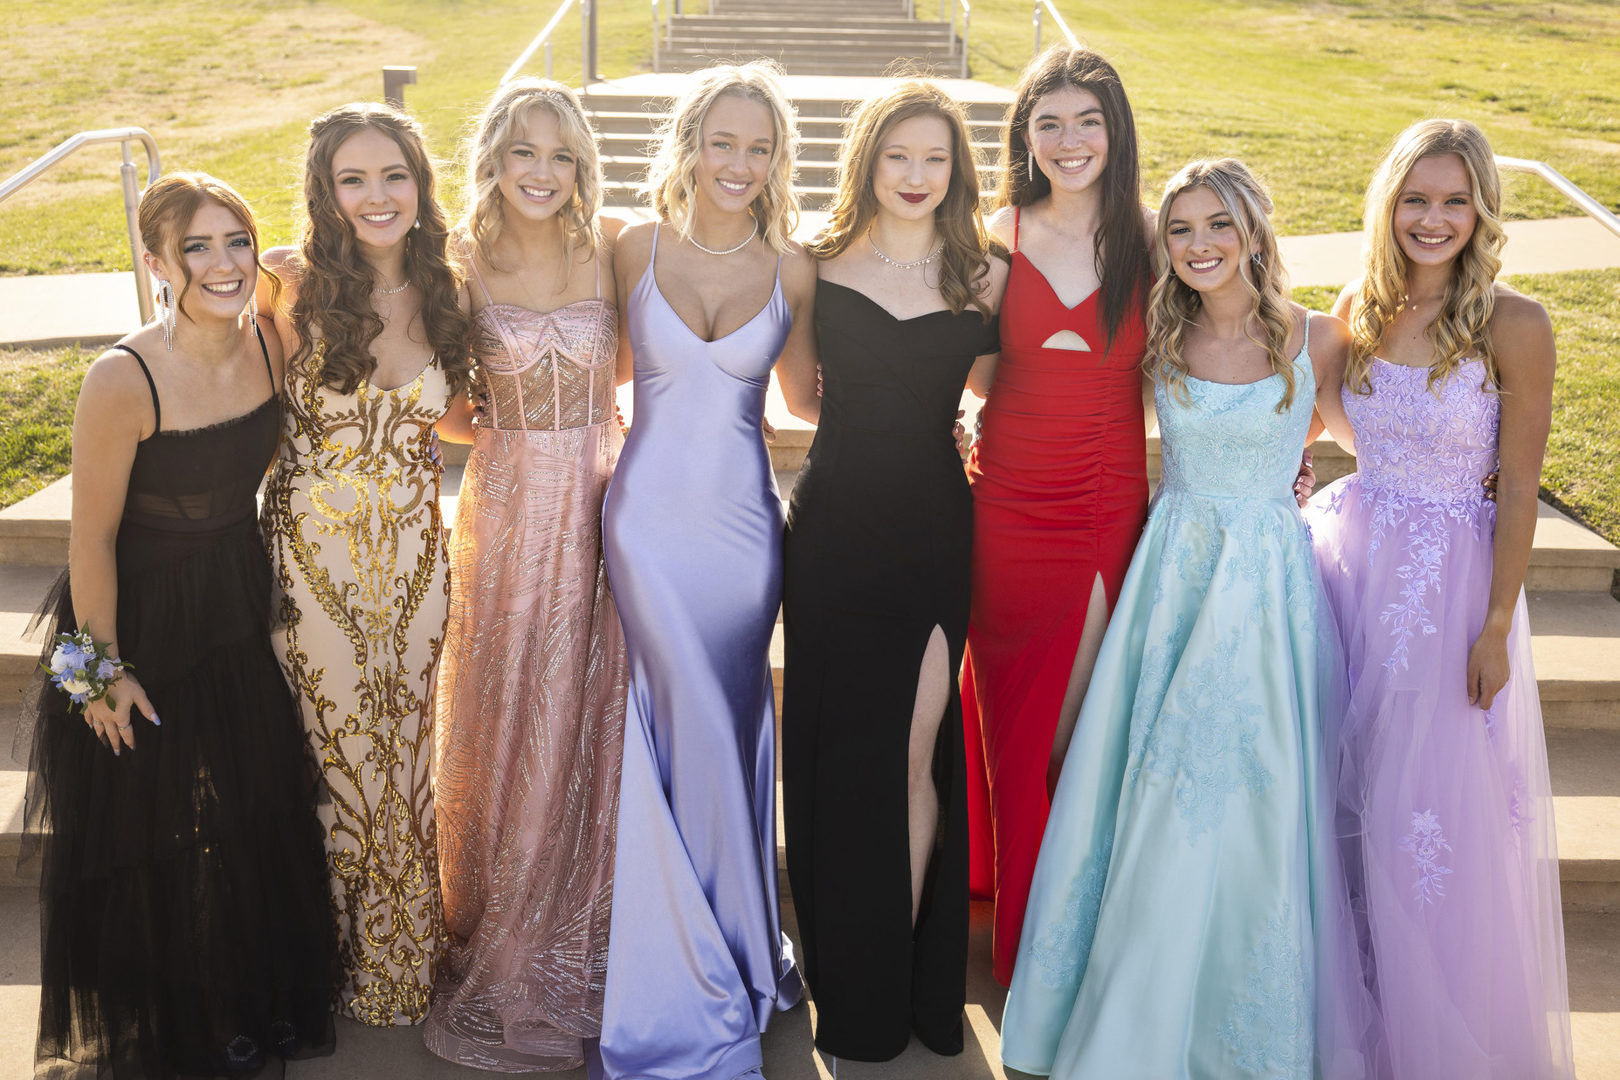 Group of girlfriends posting together for Prom night portraits